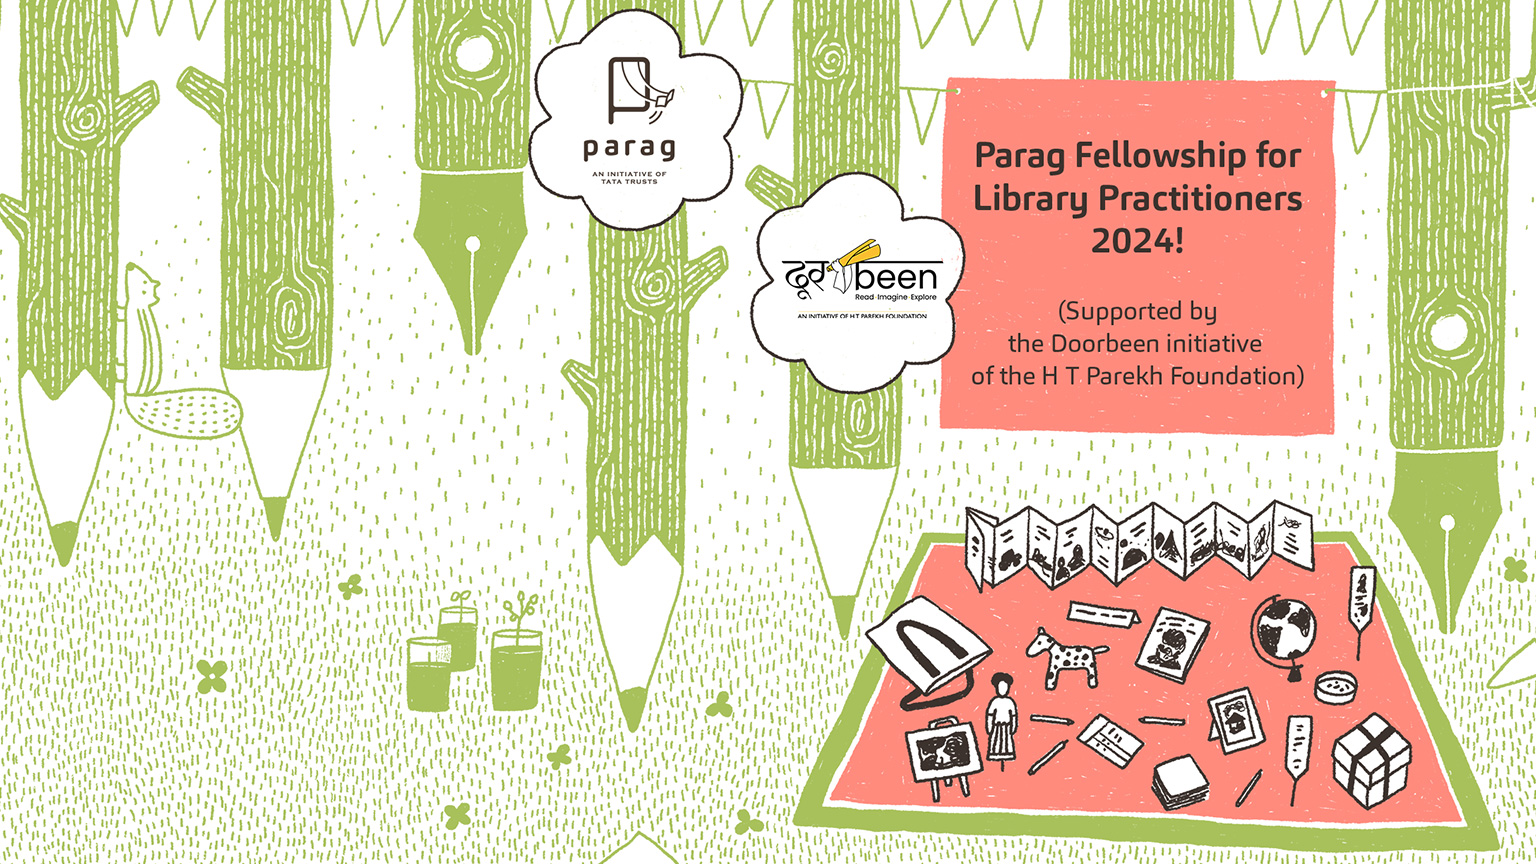 Parag Fellowship for Library Practitioners 2024